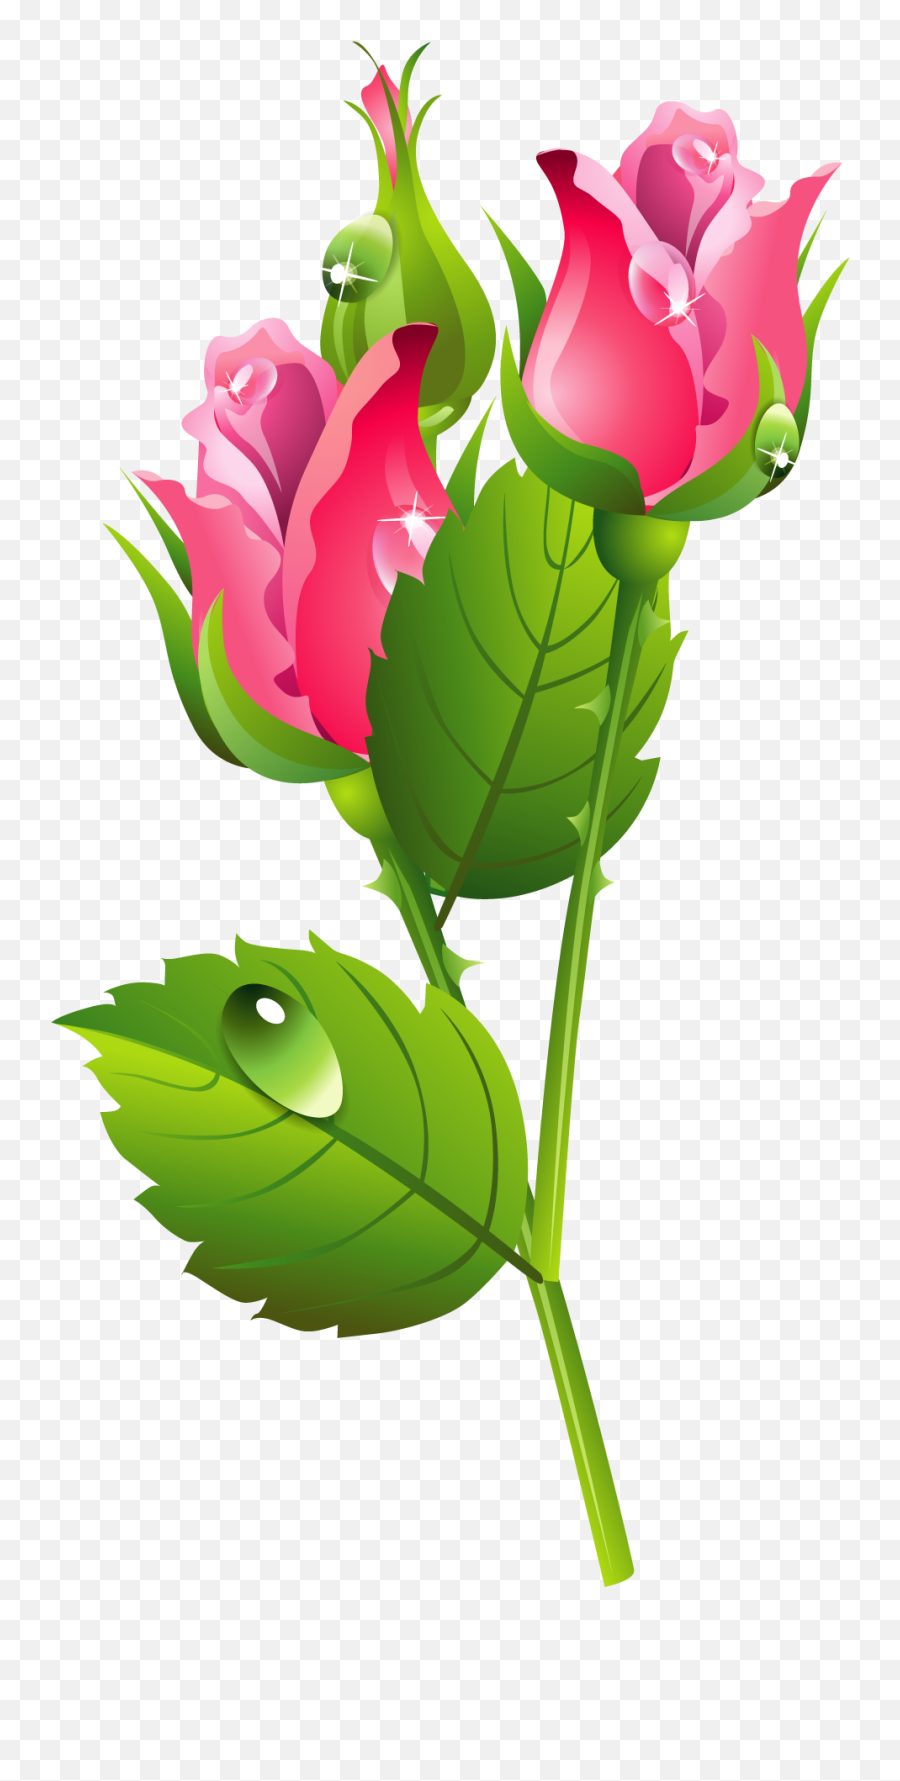 Romantic Pink Flower Border Png Transparent Image Mart - Have A Beautiful Day Gif,Leaf Border Png